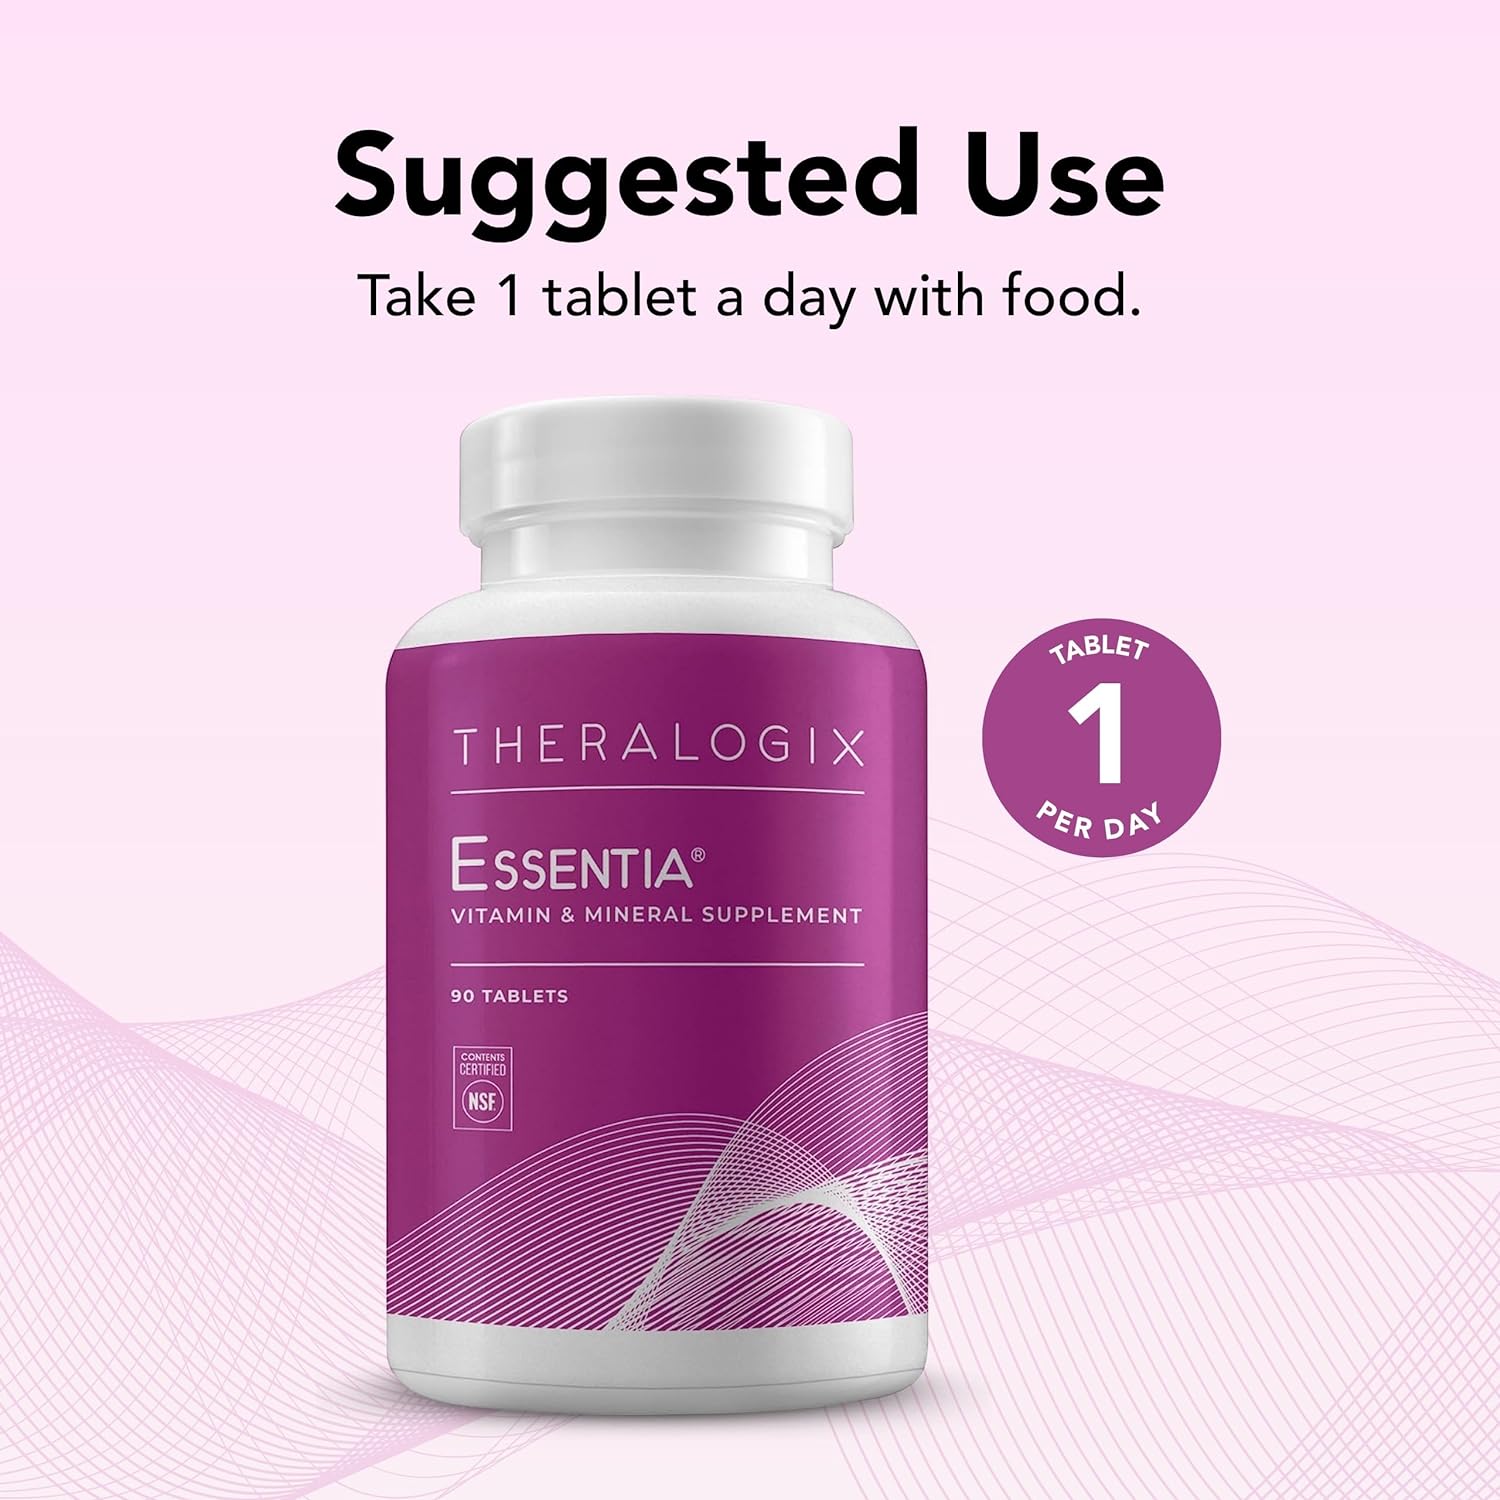 Theralogix Essentia Multivitamin for Women - 90-Day Supply - Women's Daily Multivitamin - Supports Immune Health & Bone Health - Includes Vitamin C, Vitamin D, Zinc & More - NSF Certified - 90 Tablets : Health & Household